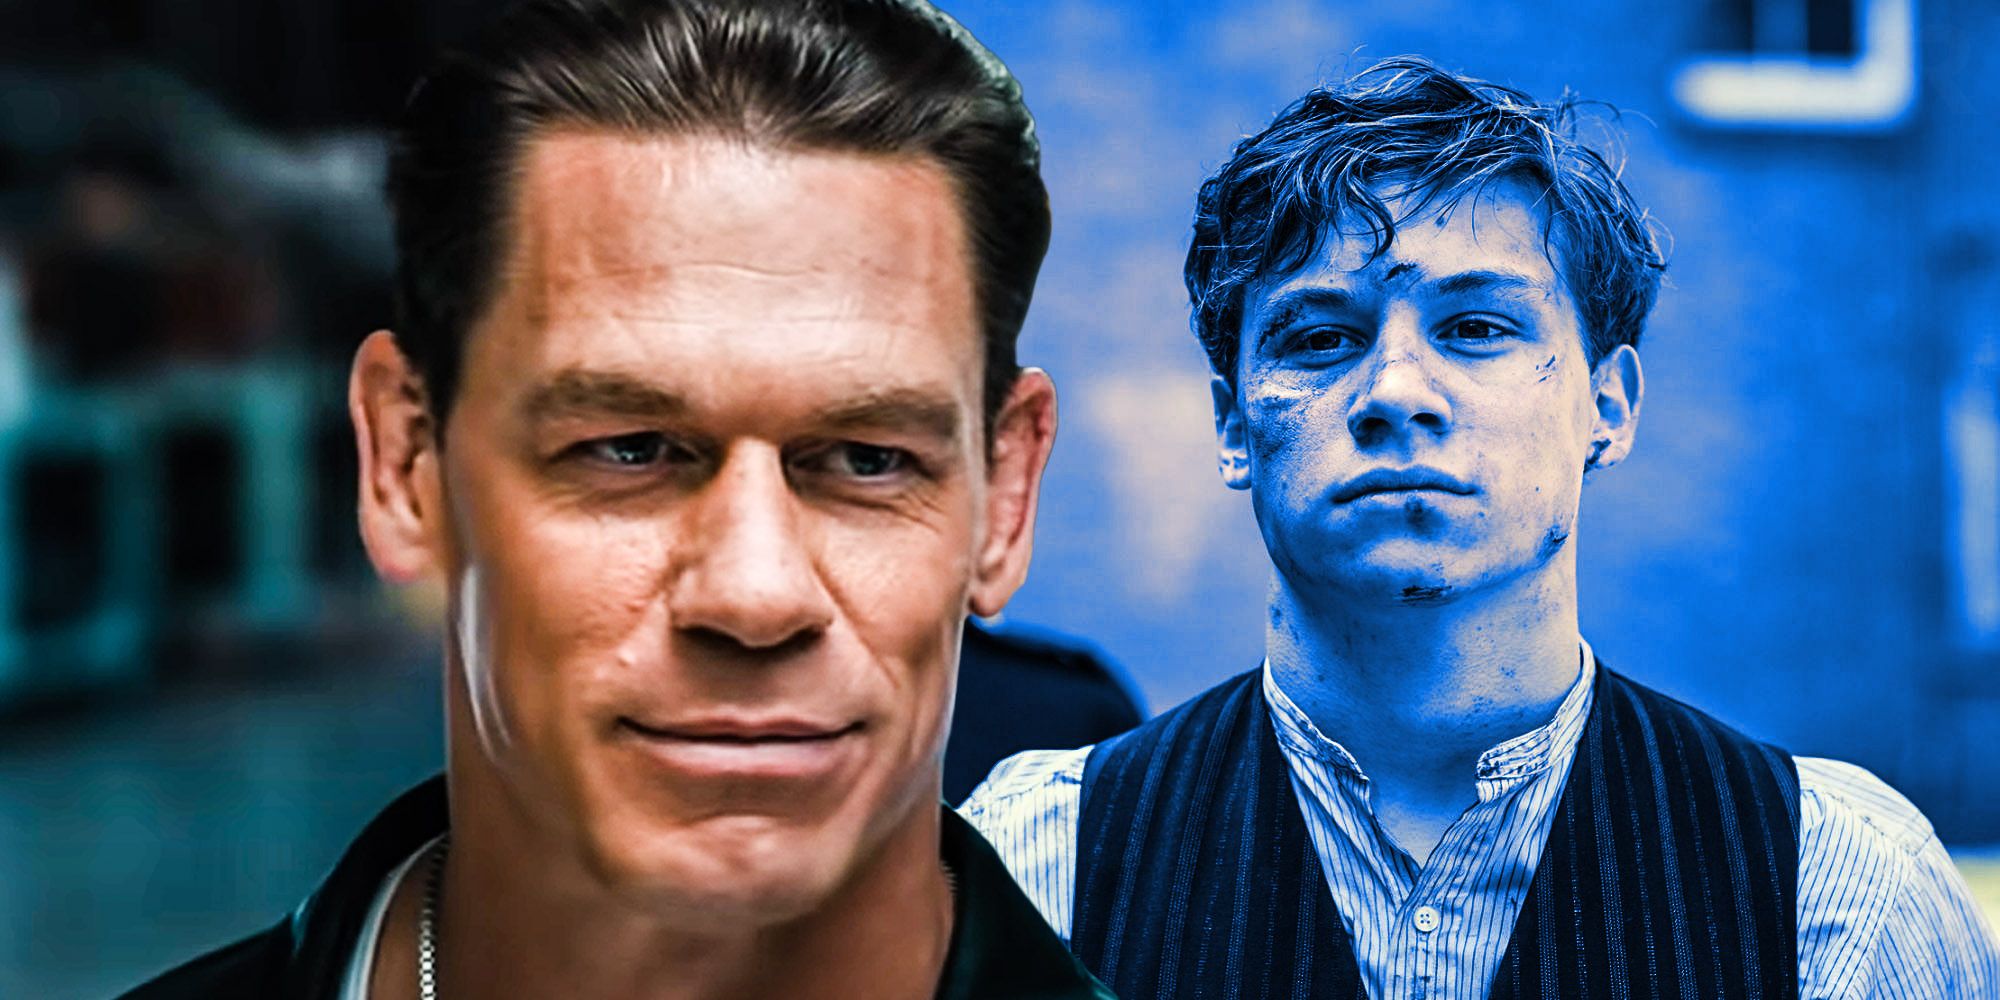 Who Plays Young John Cena In Fast & Furious 9